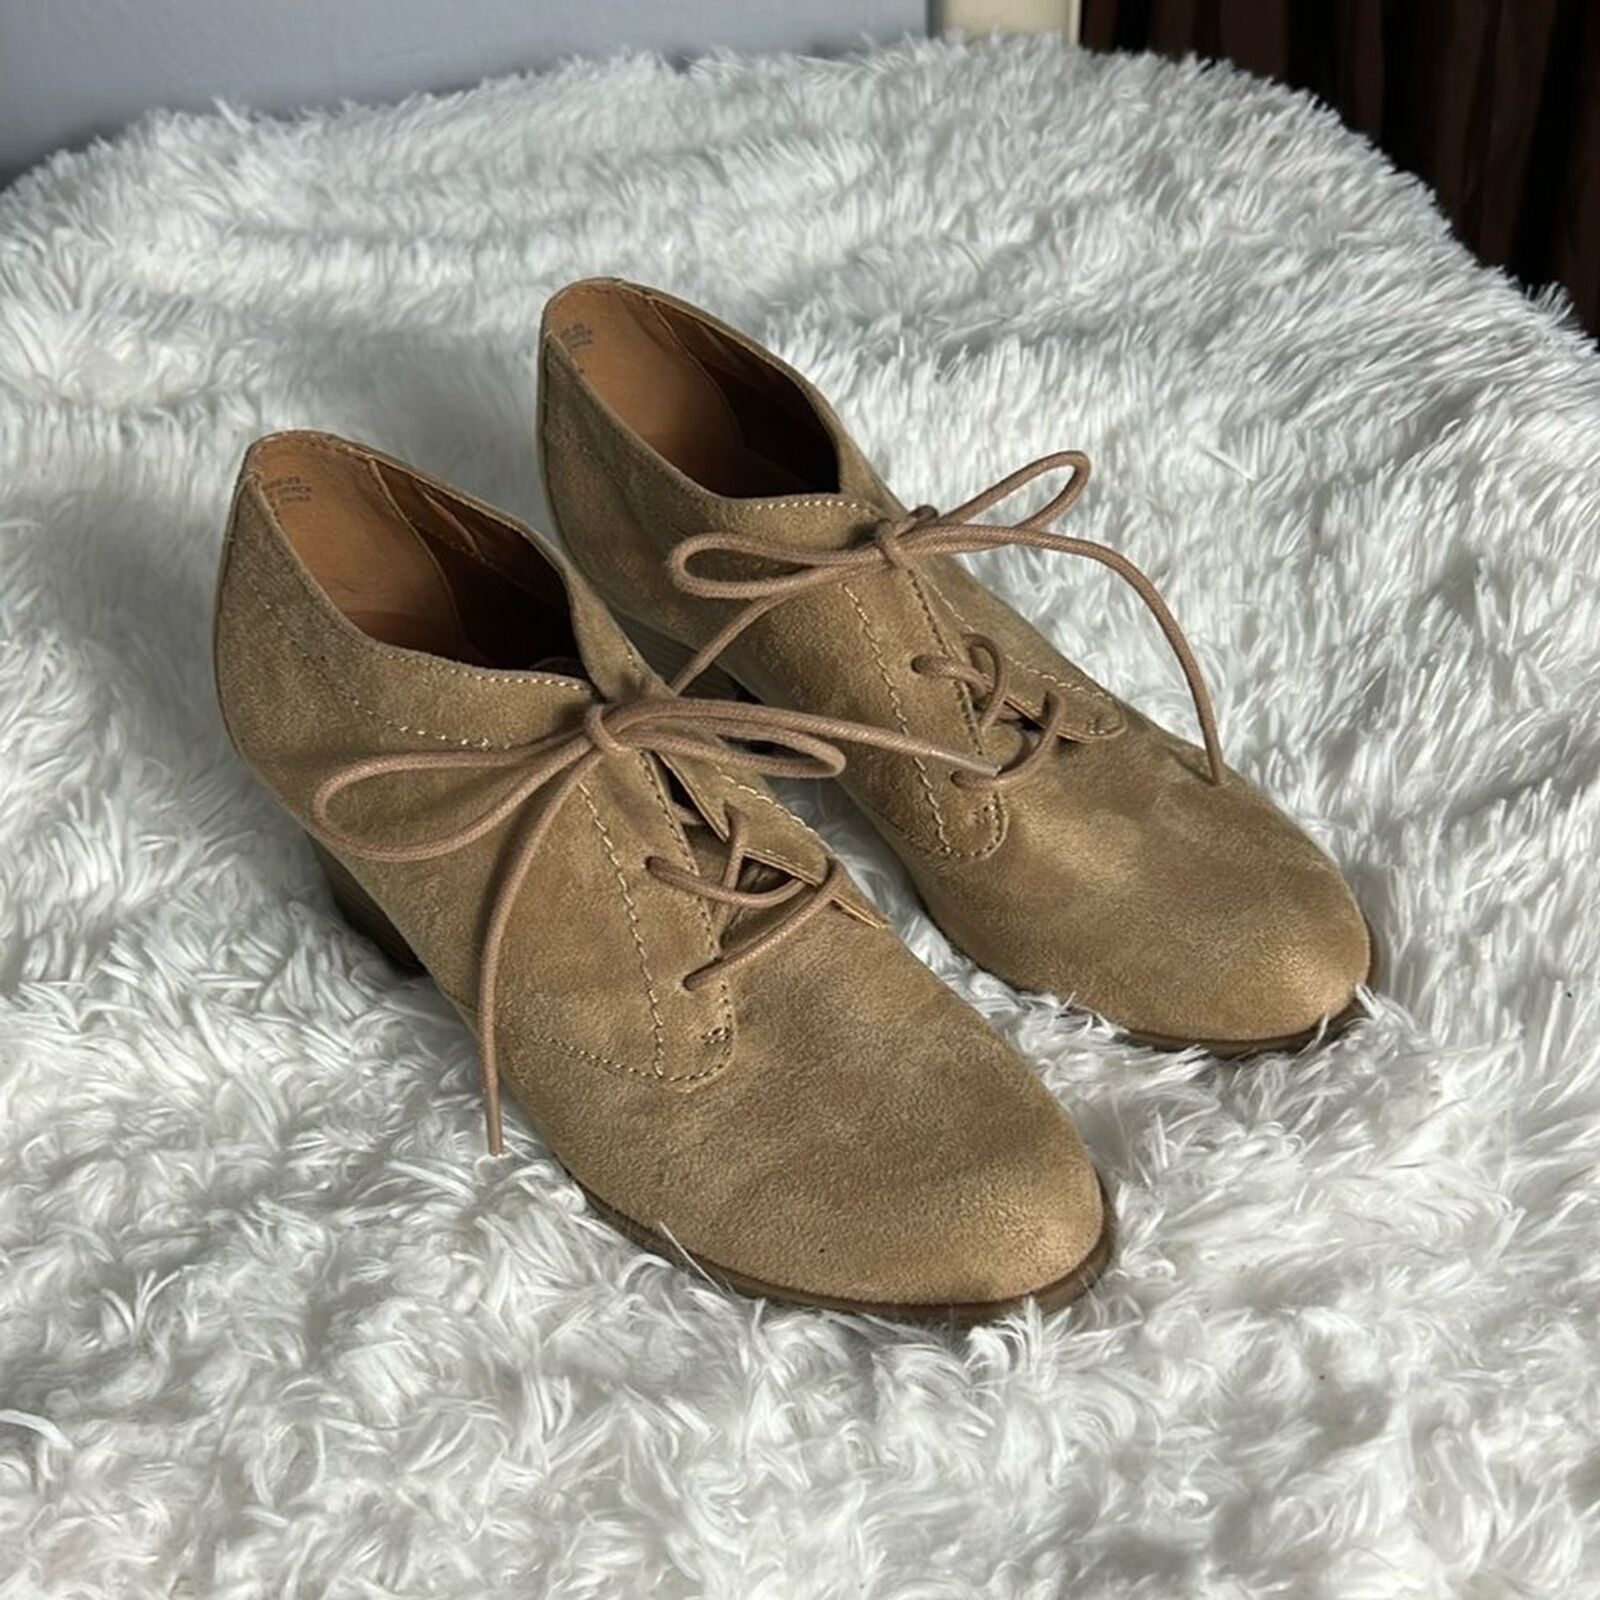 Indigo Rd. Tan Suede Lace Up Heeled Booties Shoes 7